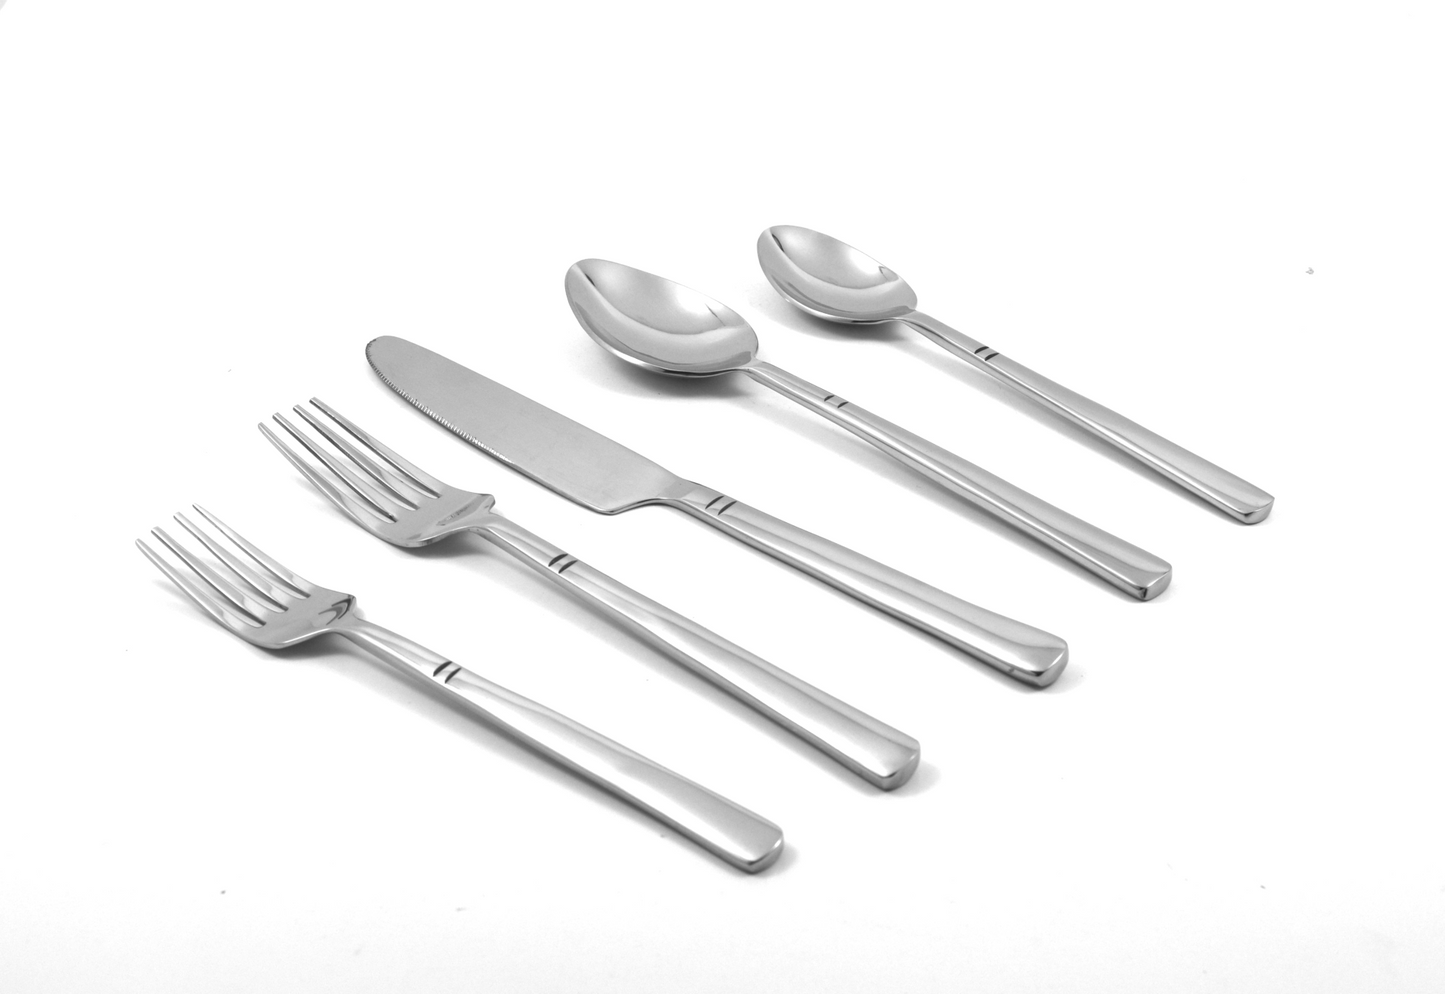 Flatware set of 20 Pieces Silver Plain Design Stainless Steel